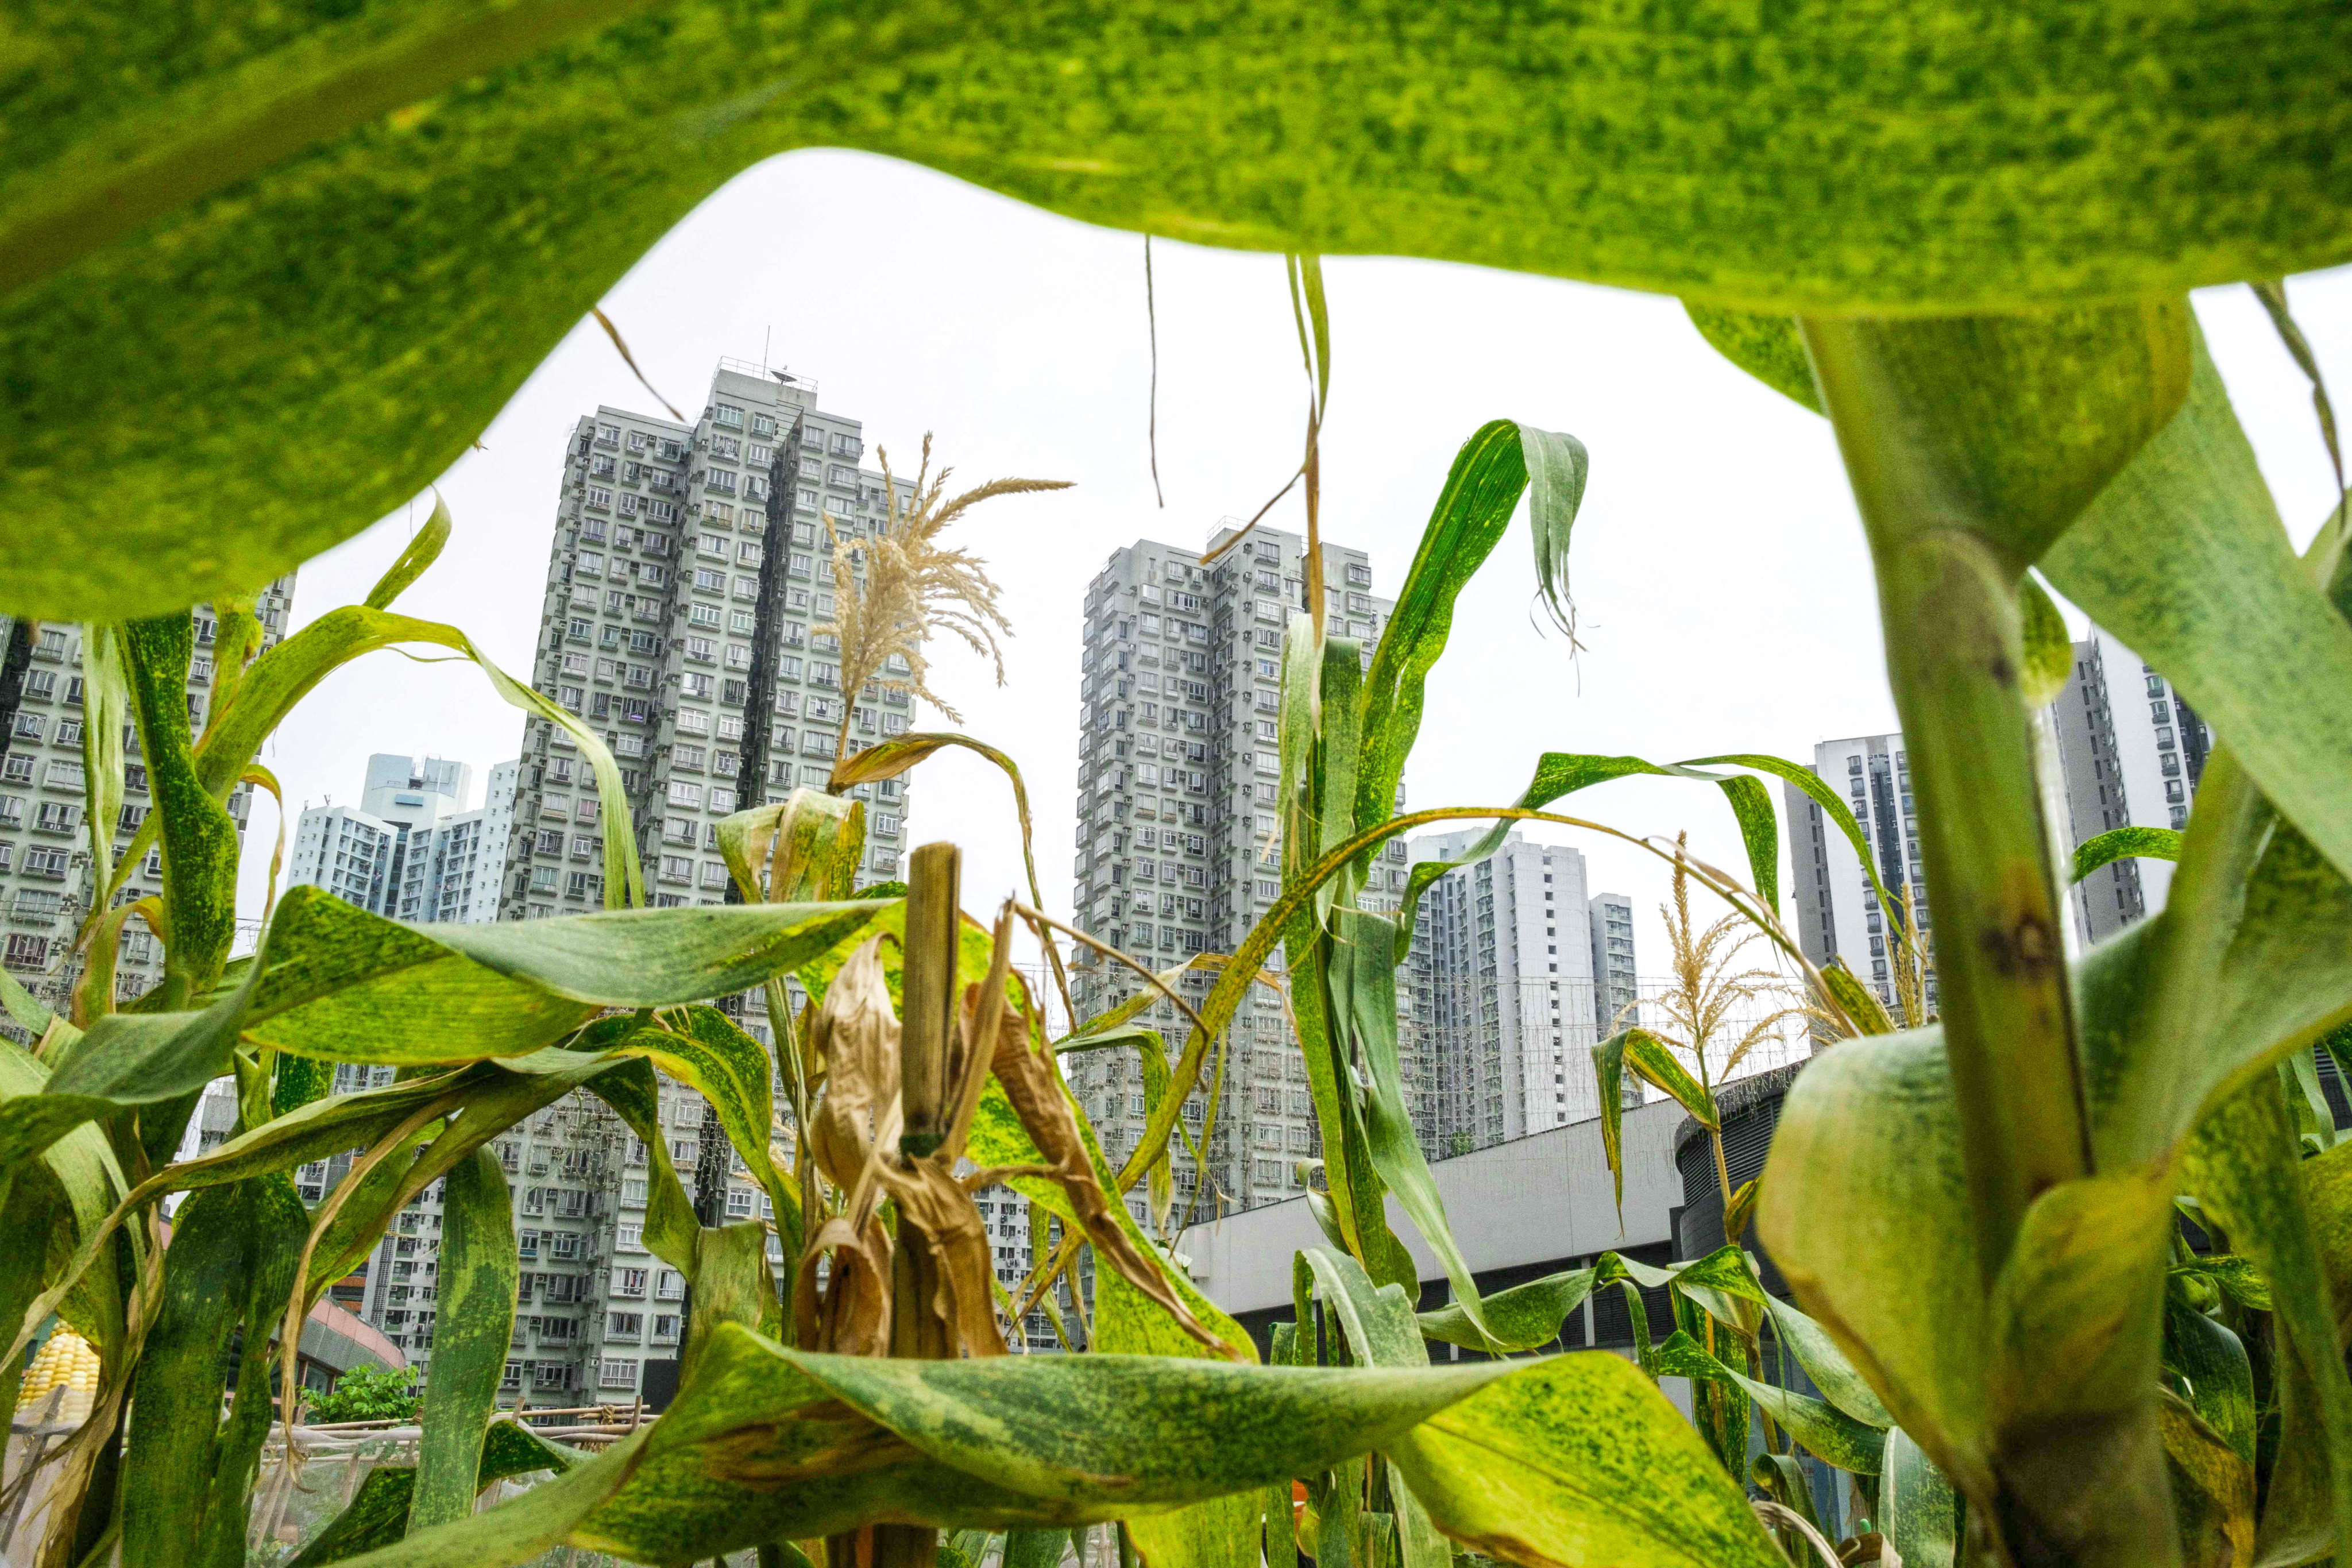 The viable space for rooftop farming in Hong Kong is not far short of the 7 million sq m of farmland in the city, the conference heard. Photo: AFP